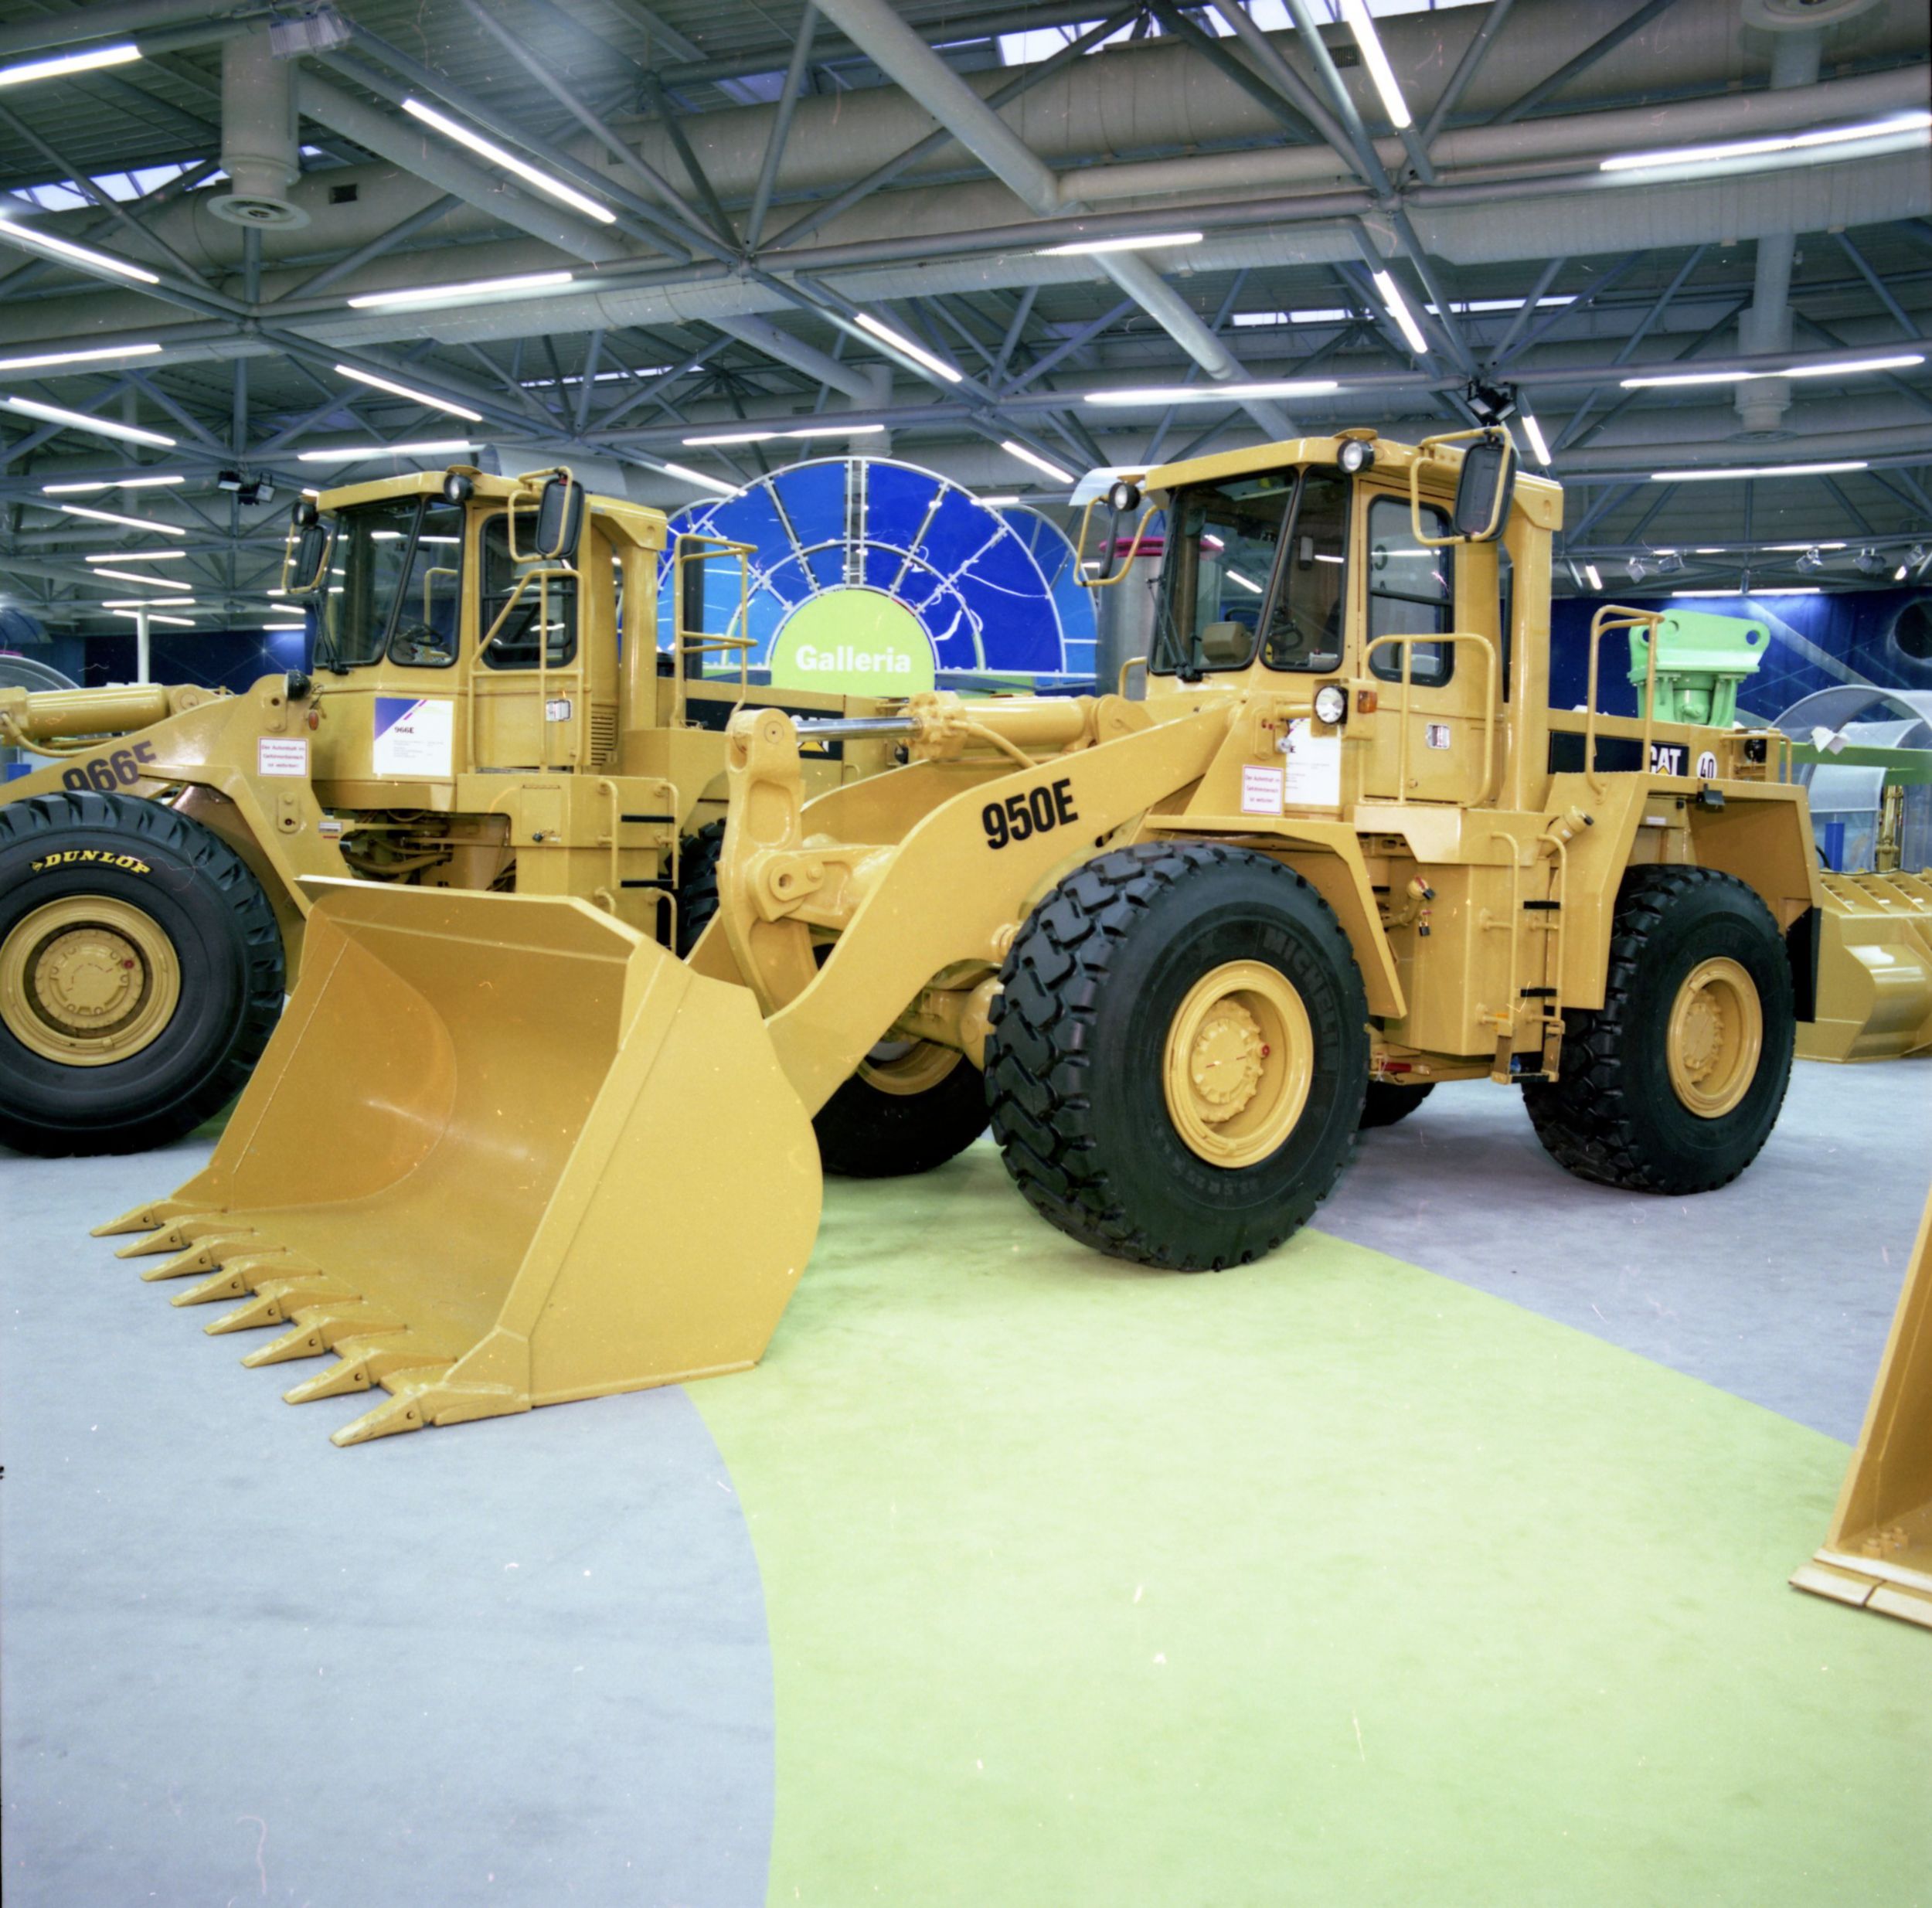 Future technology – Technology for Operating Large and Heavy Machinery on 3D models